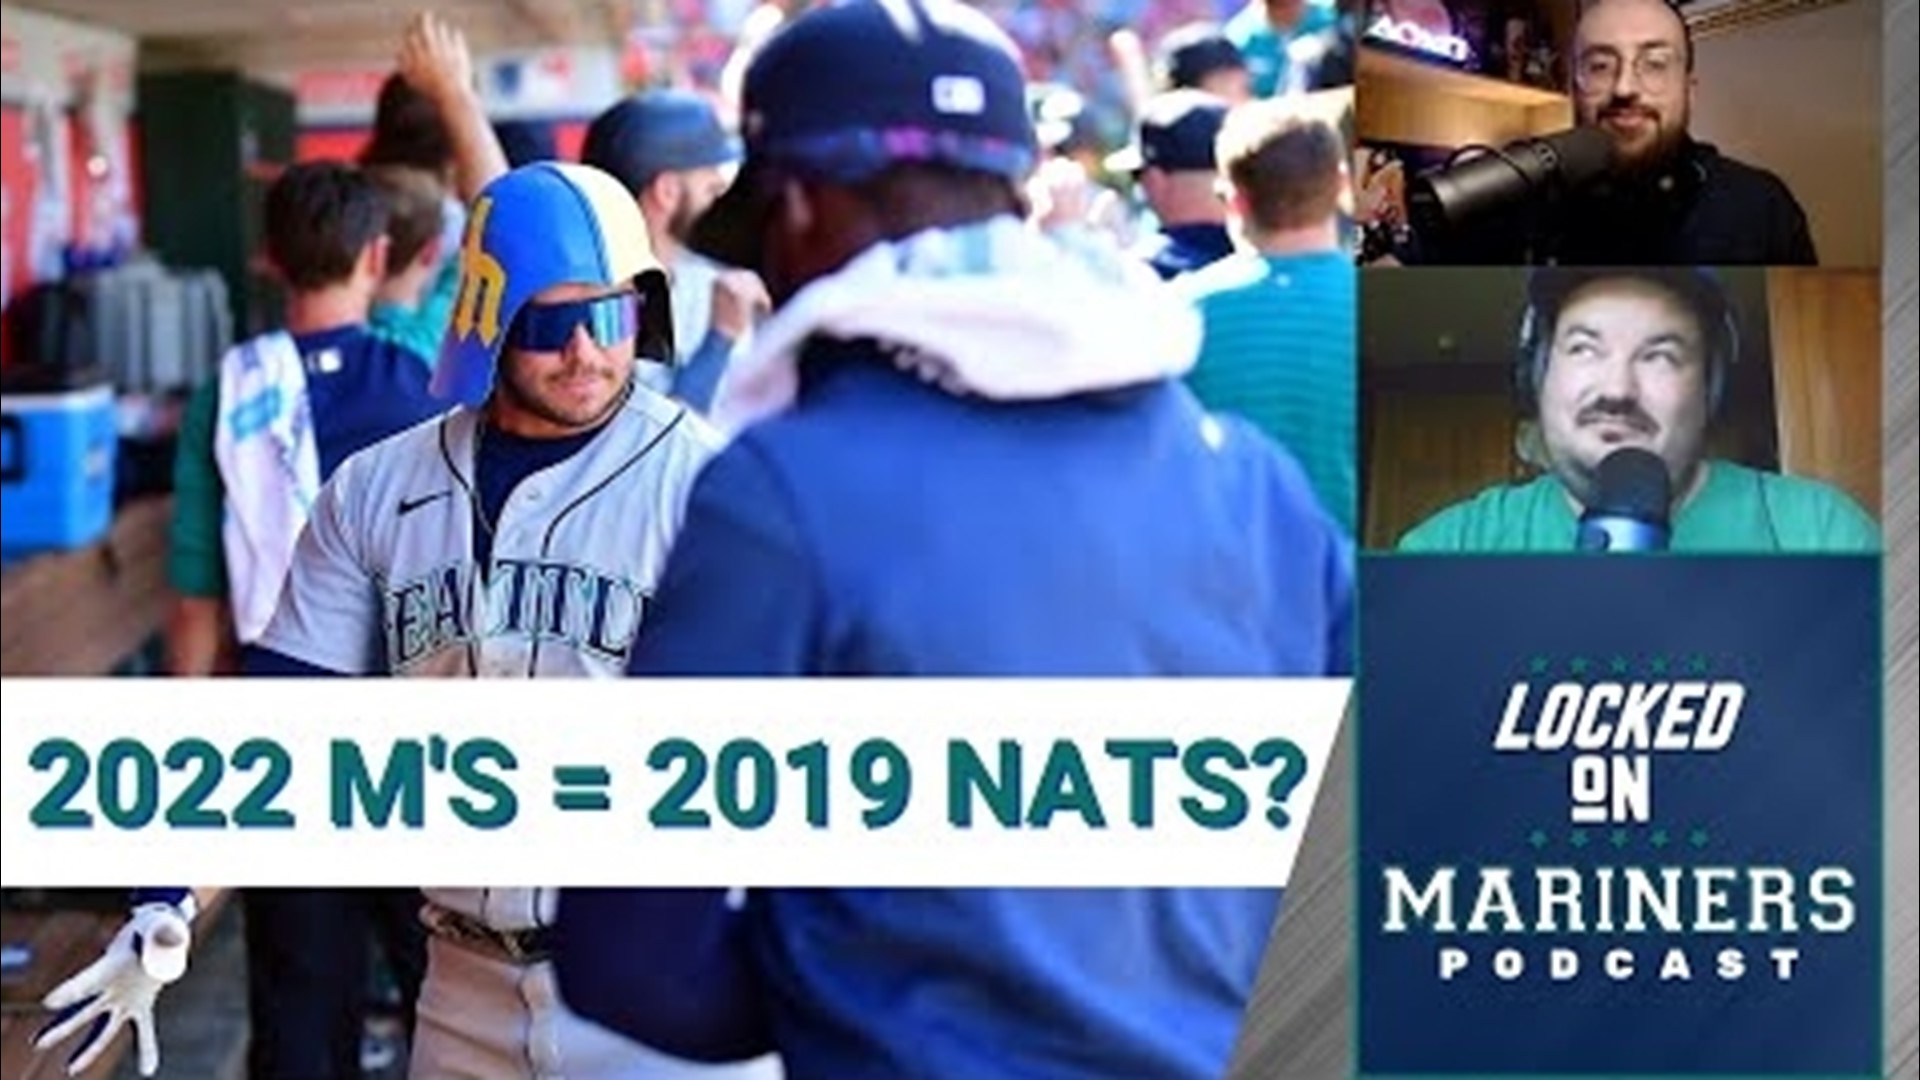 Then, Colby and Ty discuss recent World Series winners who should give the Mariners fans confidence in the 2022 team's chances.